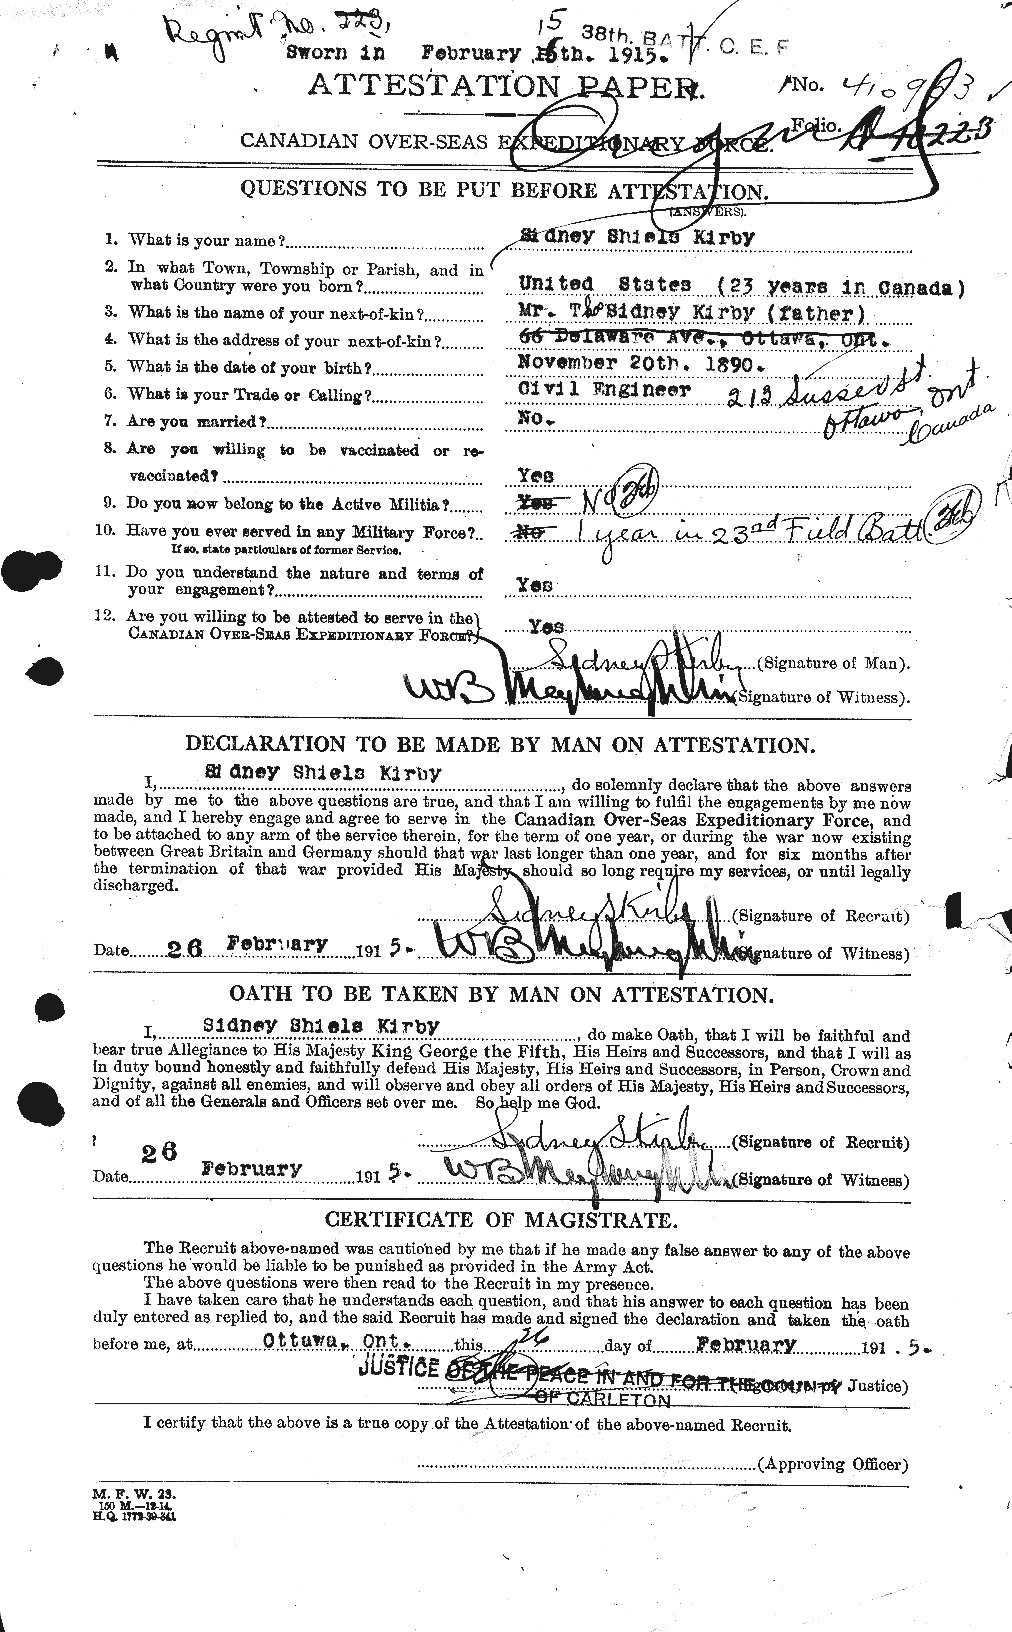 Personnel Records of the First World War - CEF 437273a